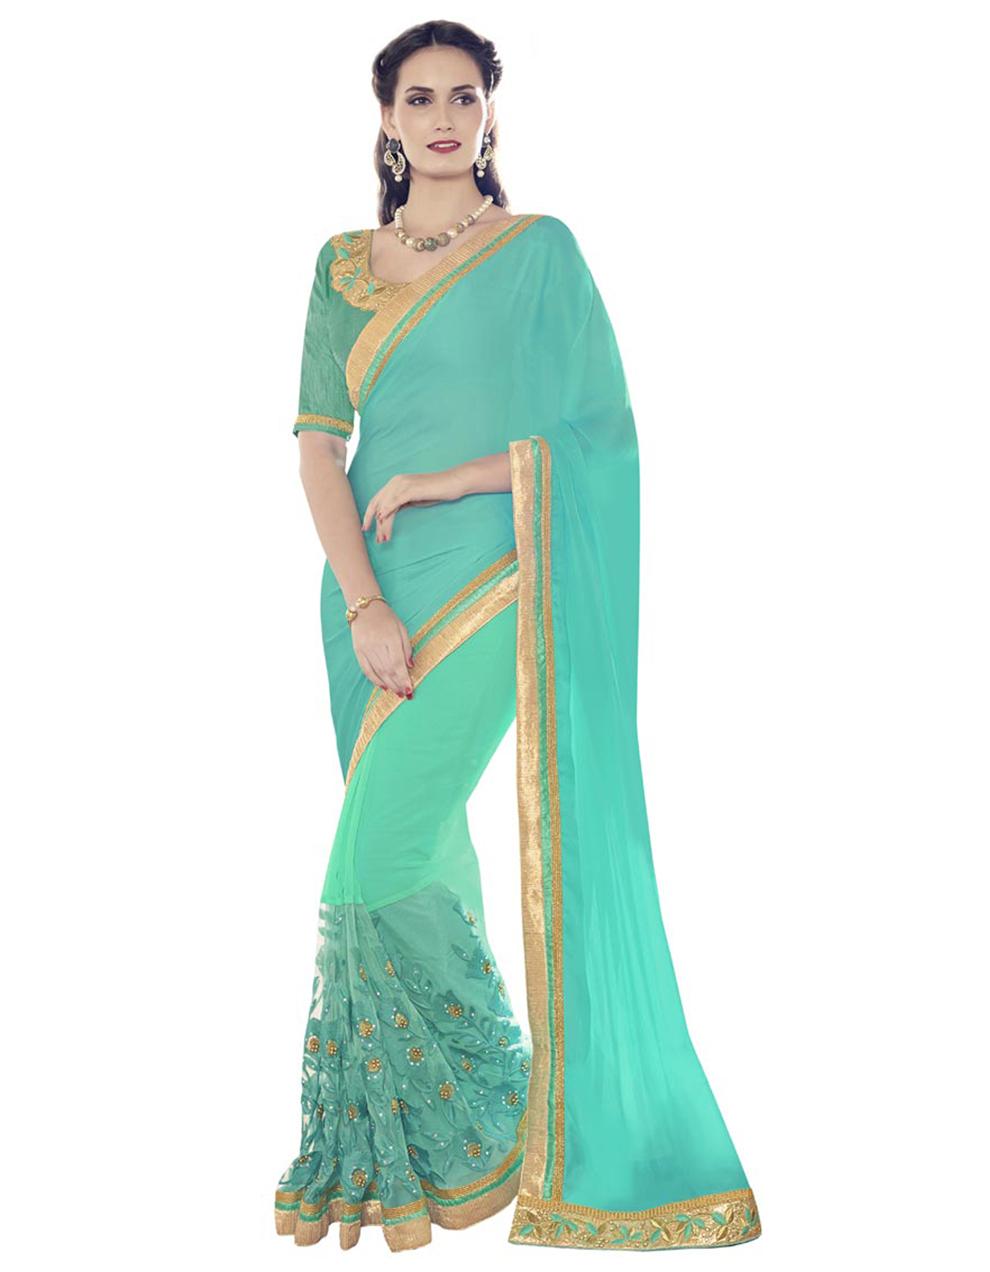 Cyan  Satin Chiffon And Net Georgette Half and Half Saree With Blouse IW13537